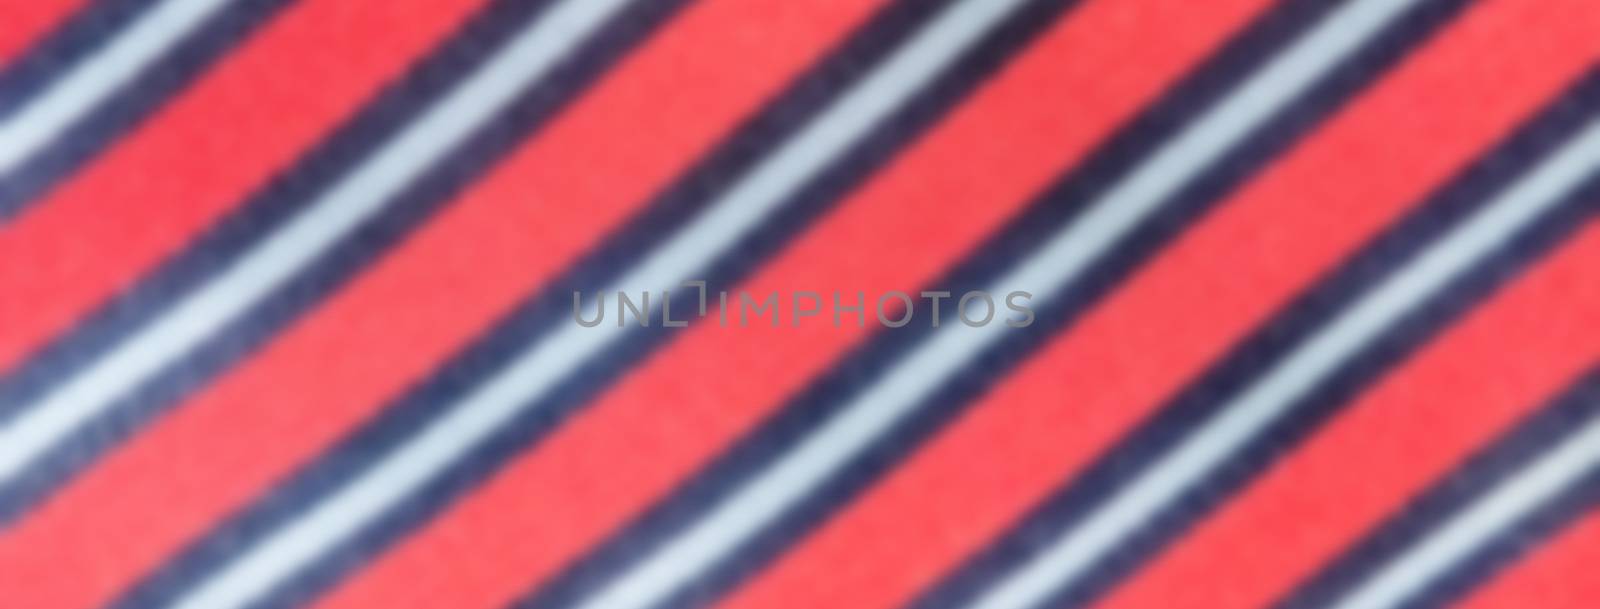 Defocused background of a necktie texture. Intentionally blurred post production for bokeh effect